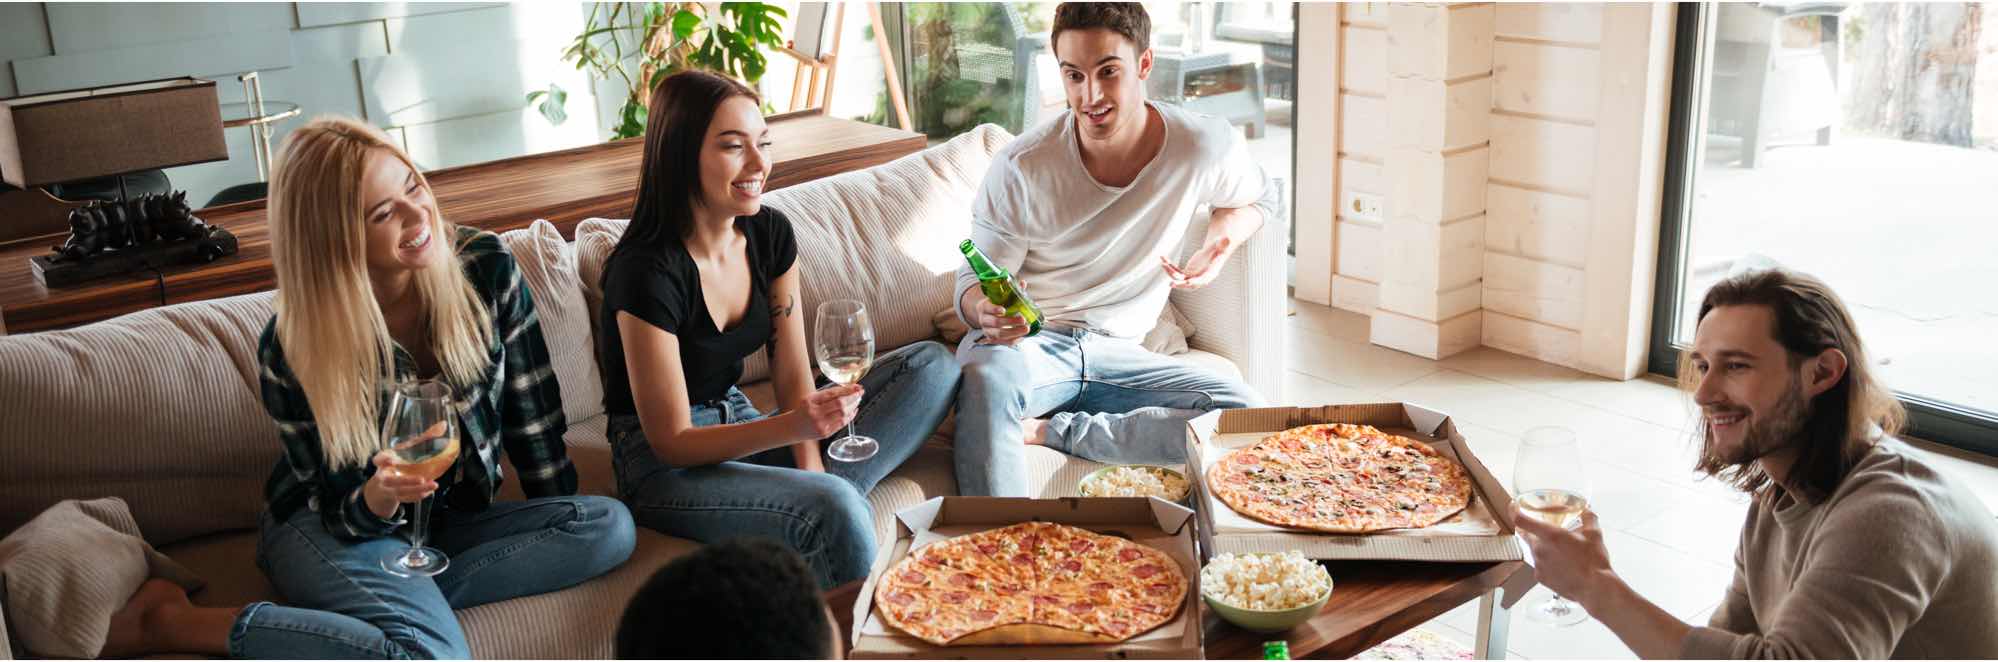 Four people sitting around a table eating pizza